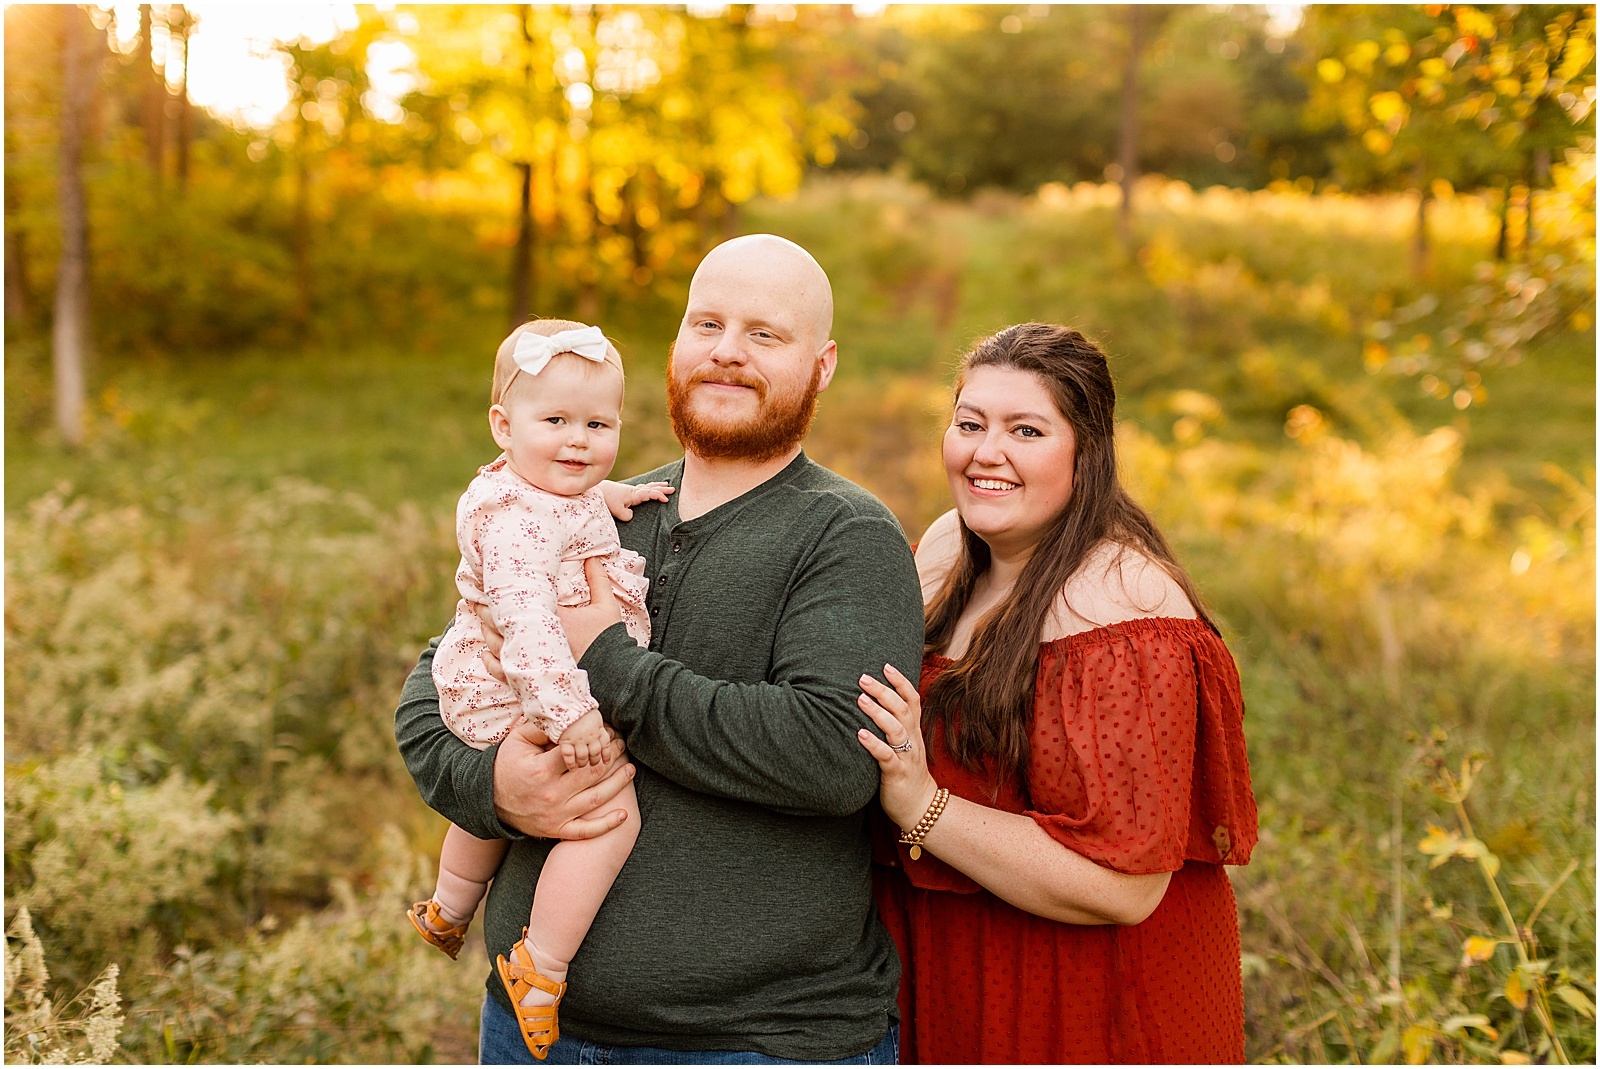 The Peck's Fall Family Session Bret and Brandie Photography | Evansville Indiana Wedding Photographers_0005.jpg